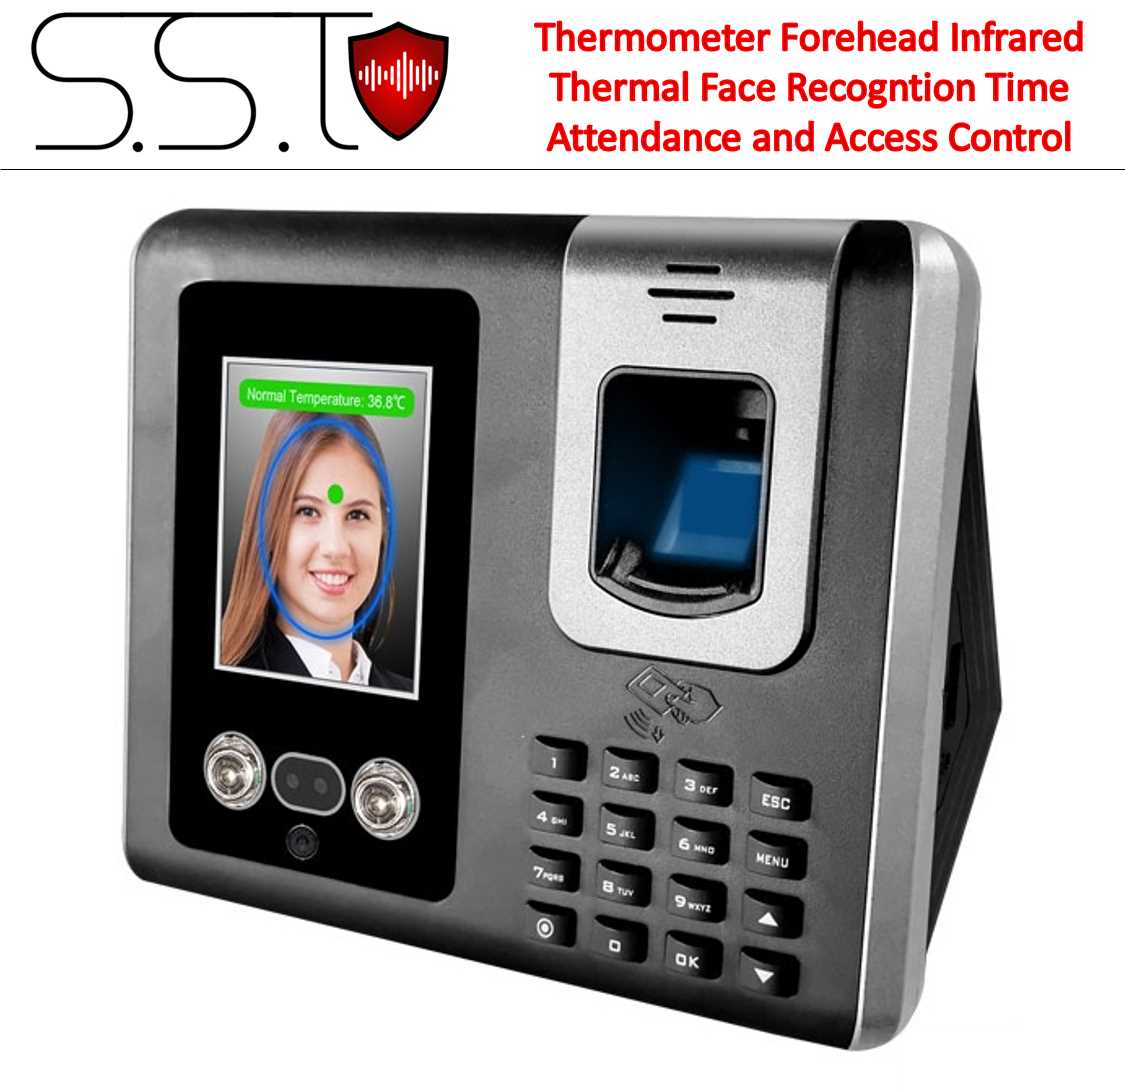 Infrared Thermal Face Recognition and Biometric Access Control System For Sale, Sound And Safety Technologies, SST , S&ST , SSTechnologies Sri Lanka.